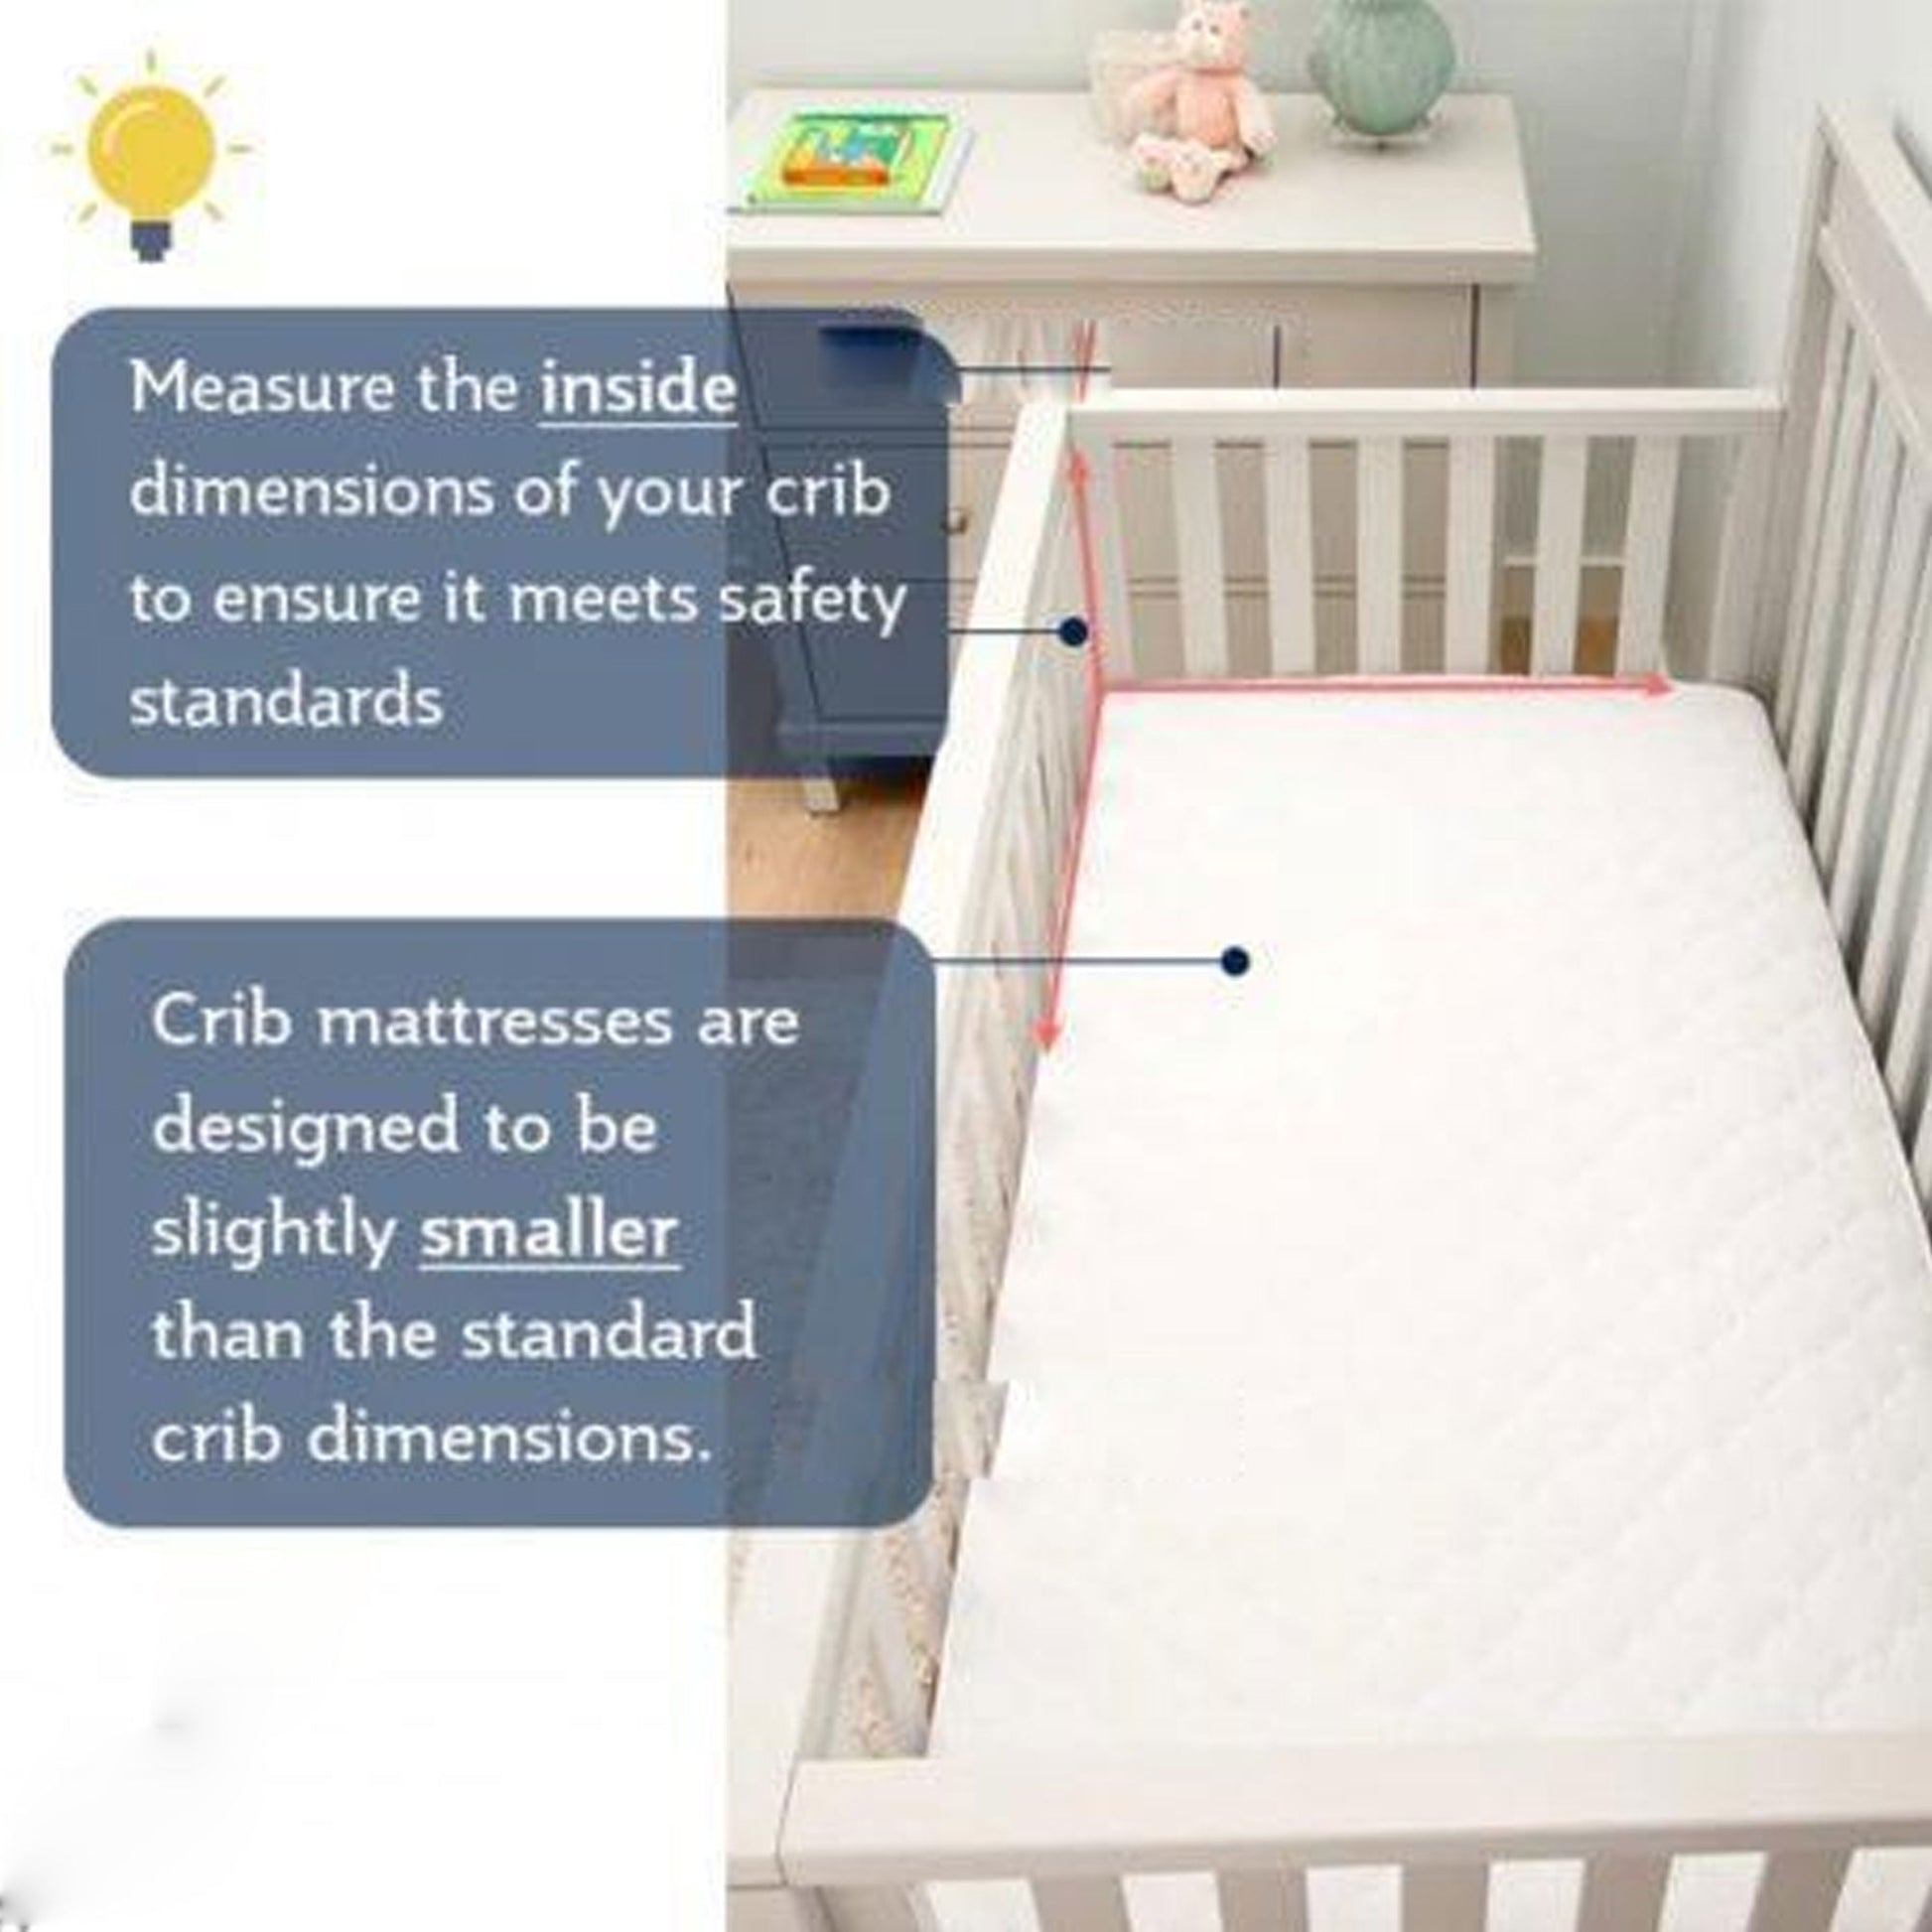 75 X 35 X 4 CM - CRIB Breathable Quilted Cot Baby Mattress - TheComfortshop.co.ukBaby Mattress0721718956808thecomfortshopTheComfortshop.co.ukCrib 75 x 3575 X 35 X 4 CM - CRIB Breathable Quilted Cot Baby Mattress - TheComfortshop.co.uk